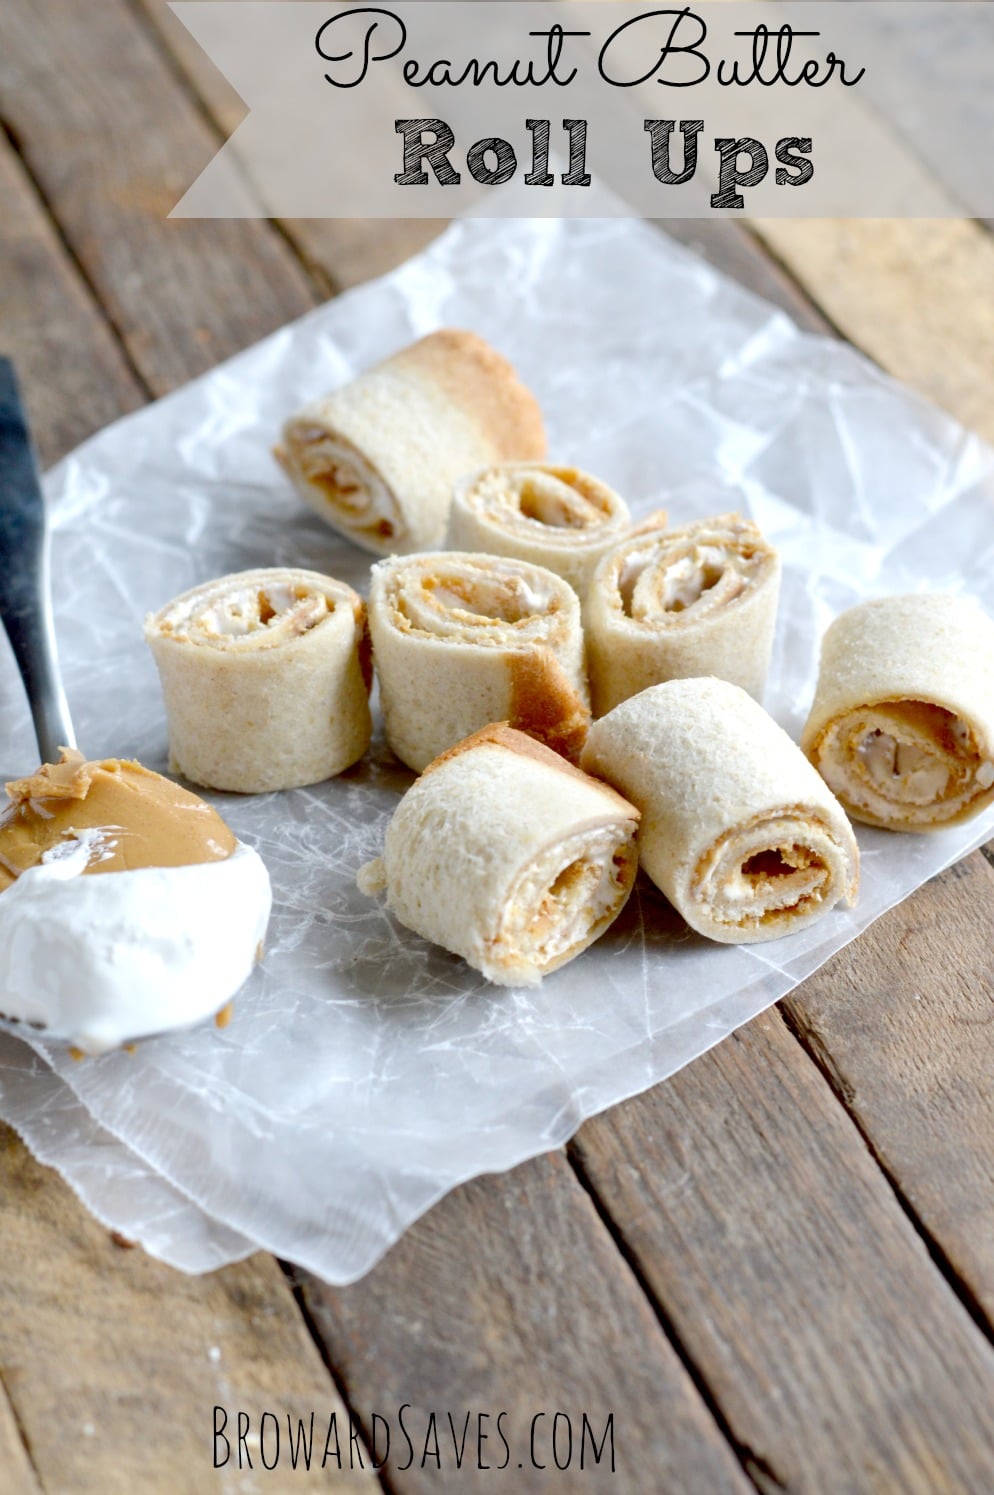 These easy peanut butter roll ups recipe requires only 3 ingredients and are the perfect fun snack to pack for the lunch box. No cooking needed! 